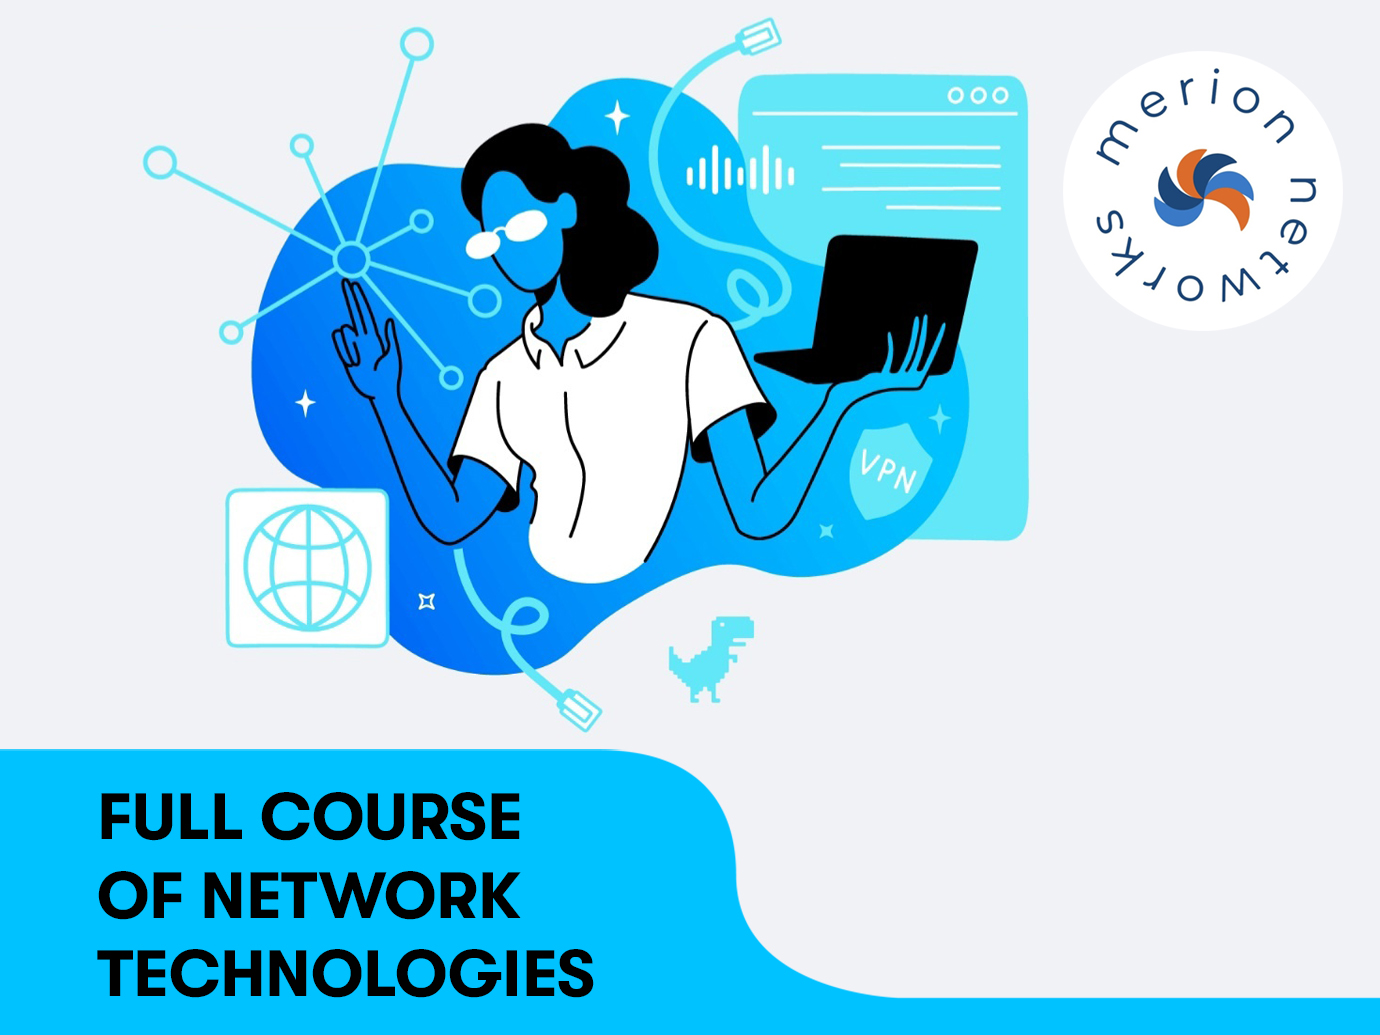 Full course on network technologies